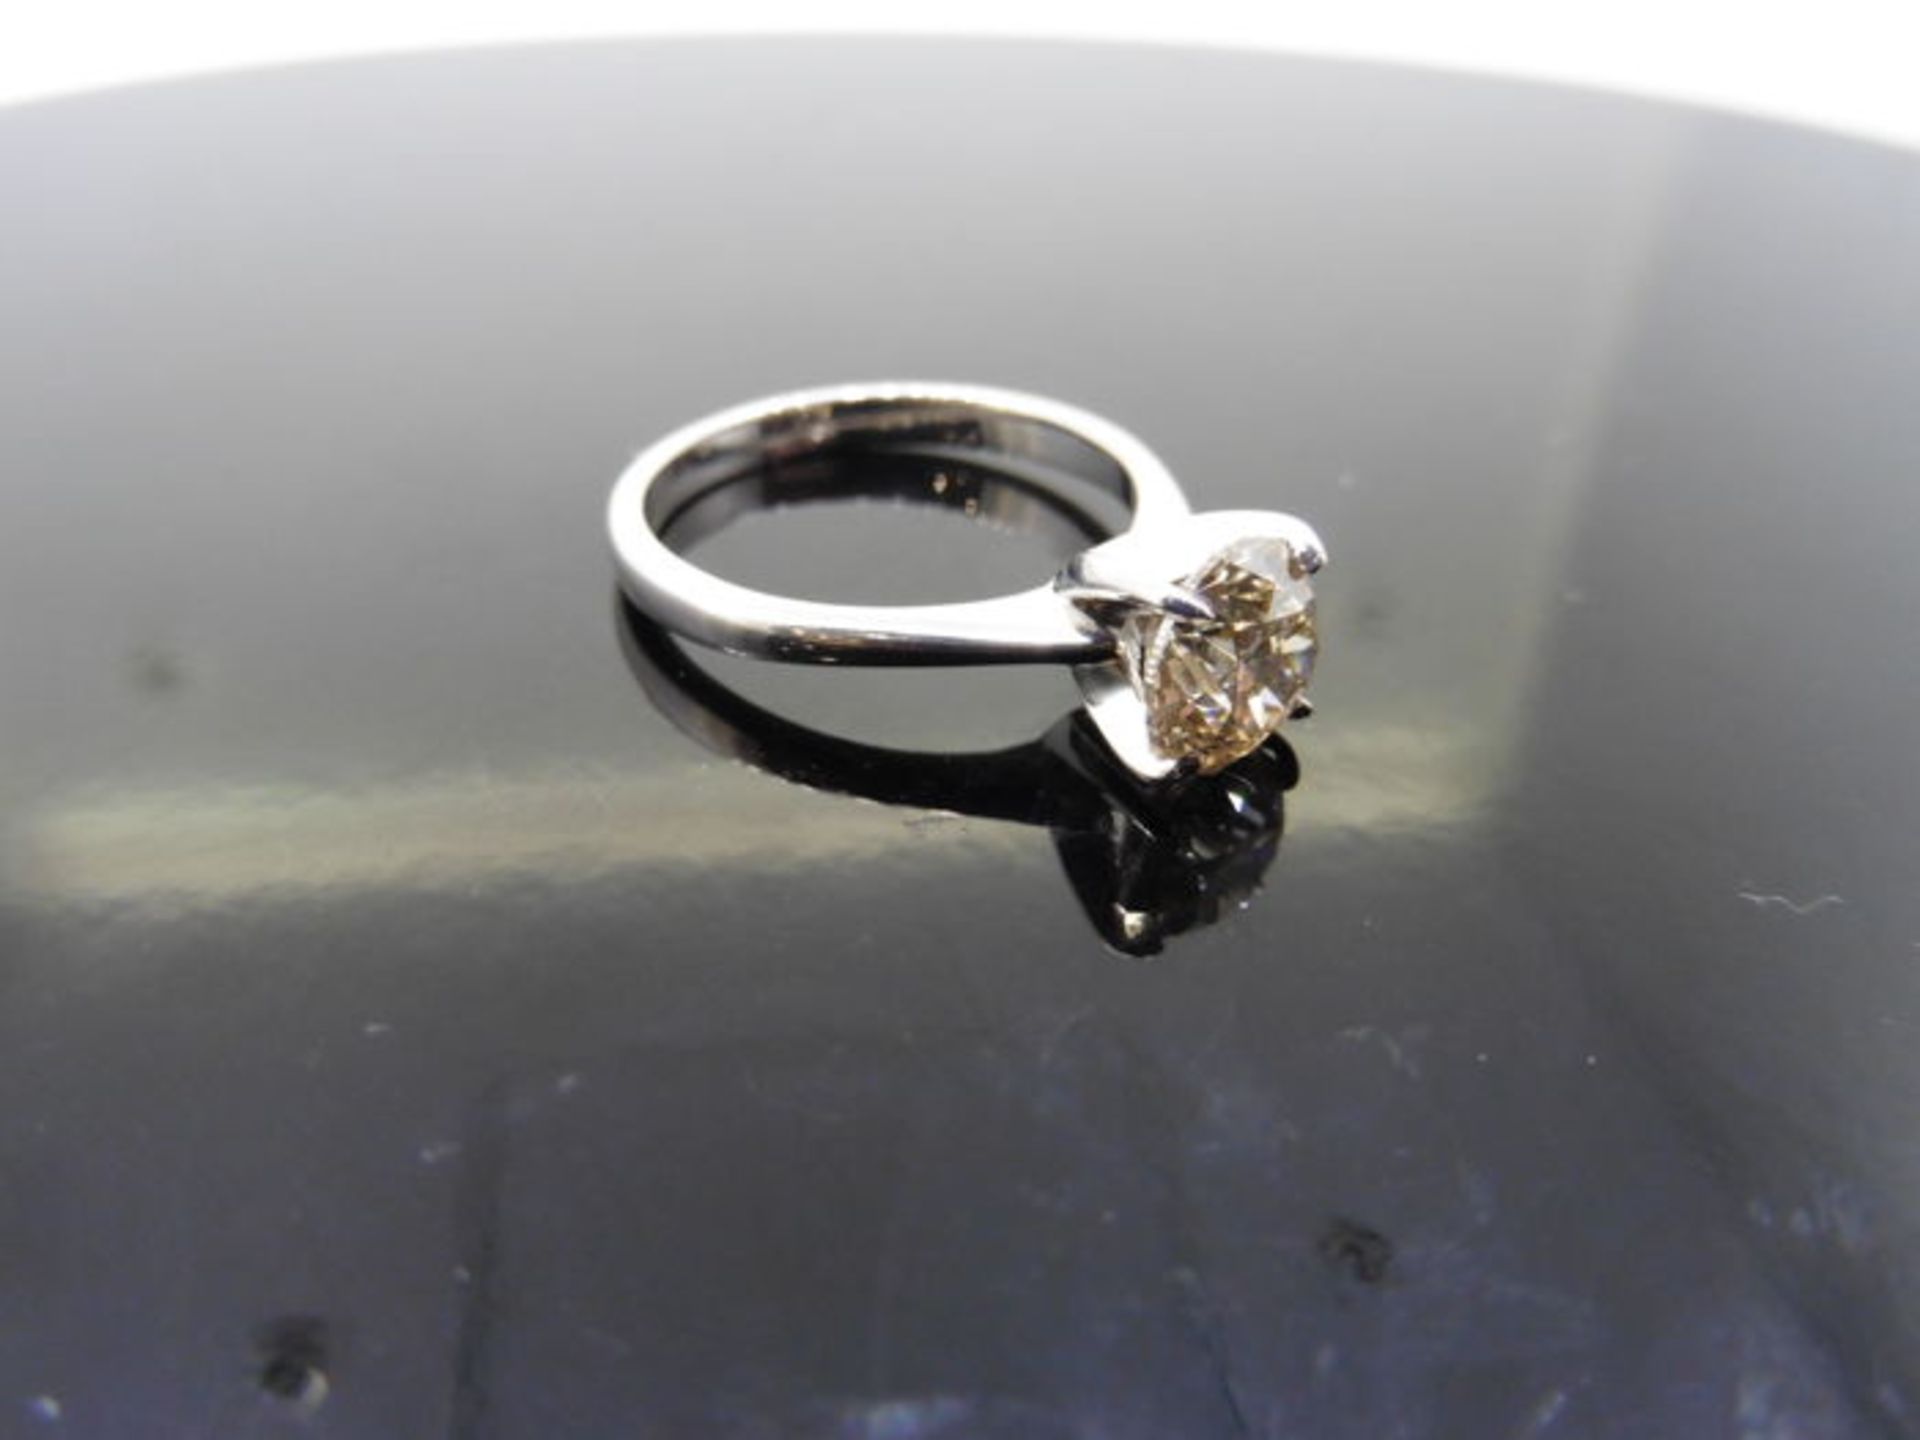 0.72ct diamond solitaire ring with a brilliant cut diamond. L colour and VS clarity. Set in 18ct